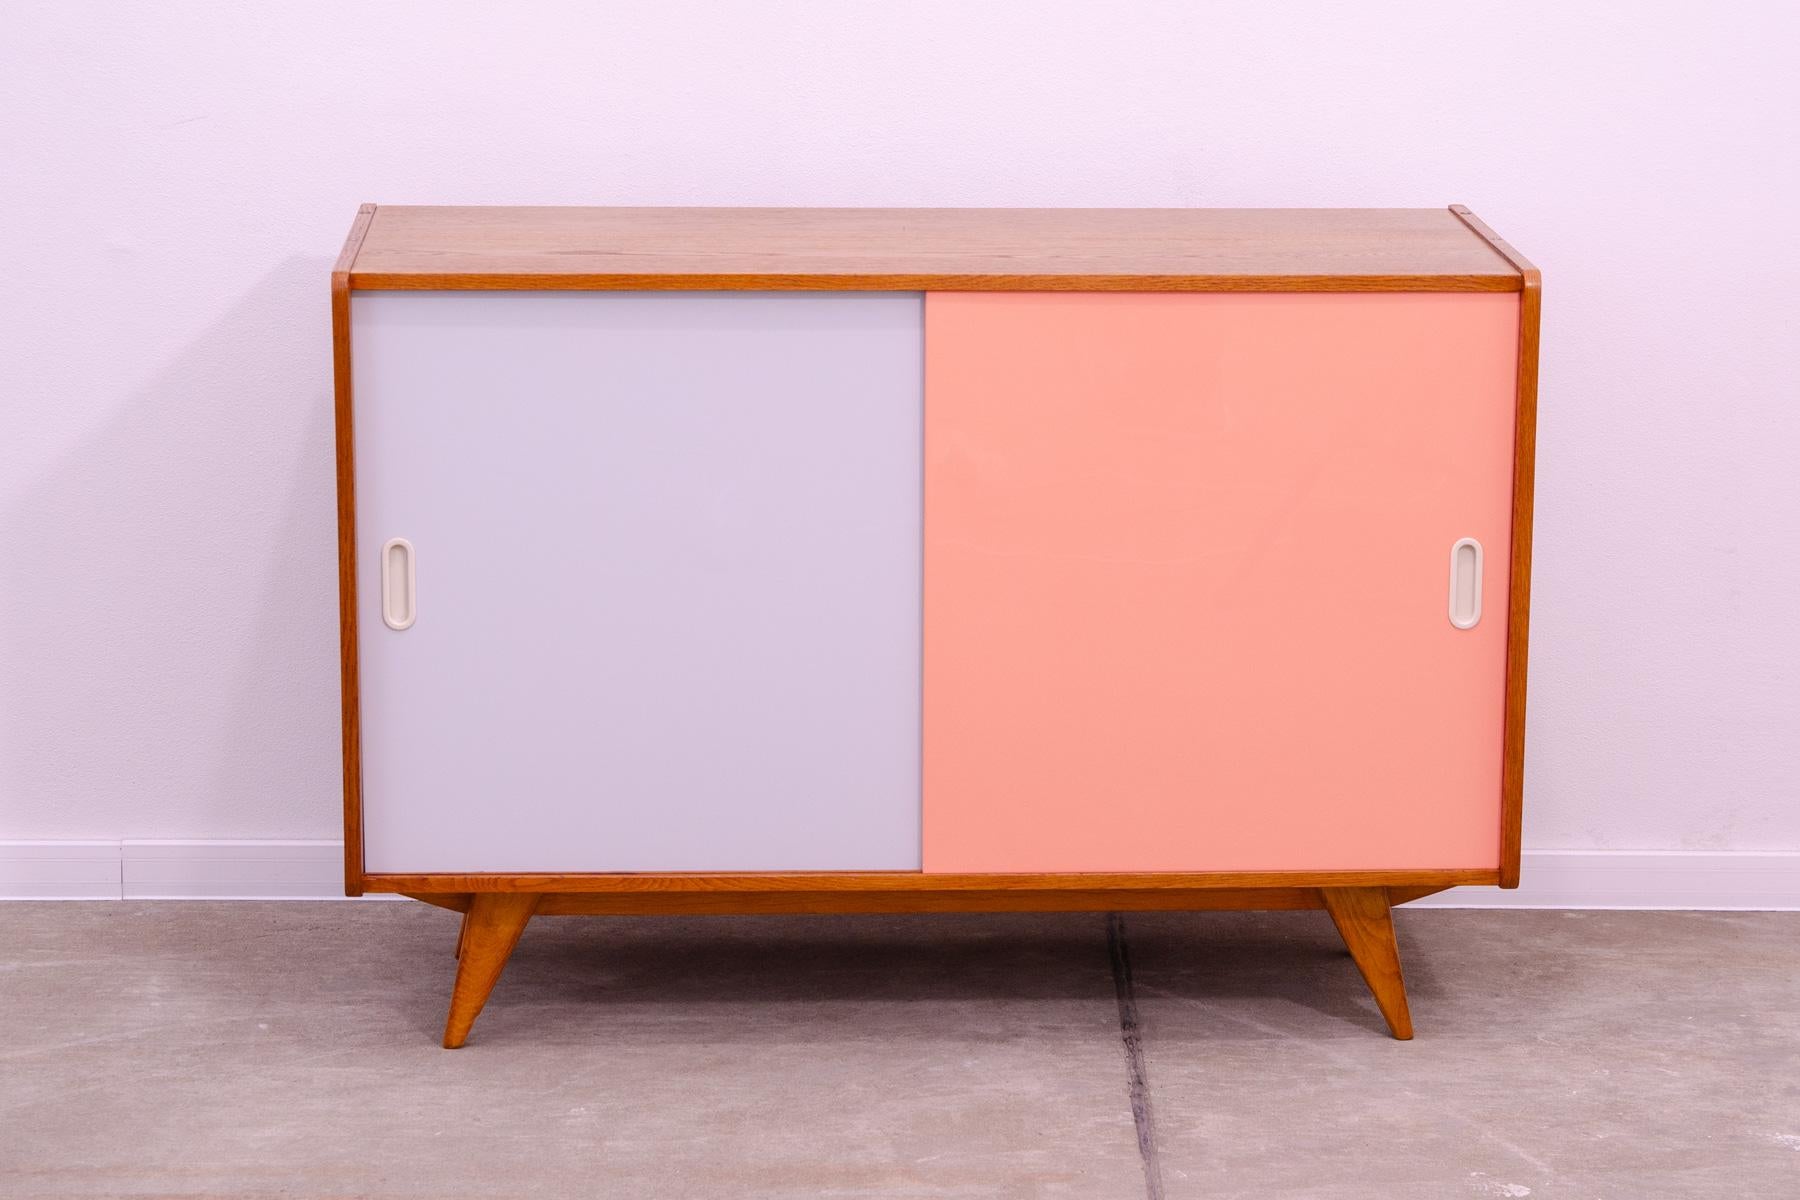 Mid century sideboard-cabinet with sliding doors, catalogue No. U-452, designed by Jiri Jiroutek. It´s made of beechwood, veneer, plywood and laminate. In excellent condition, fully refurbished.

The cabinet comes from the famous Universal series